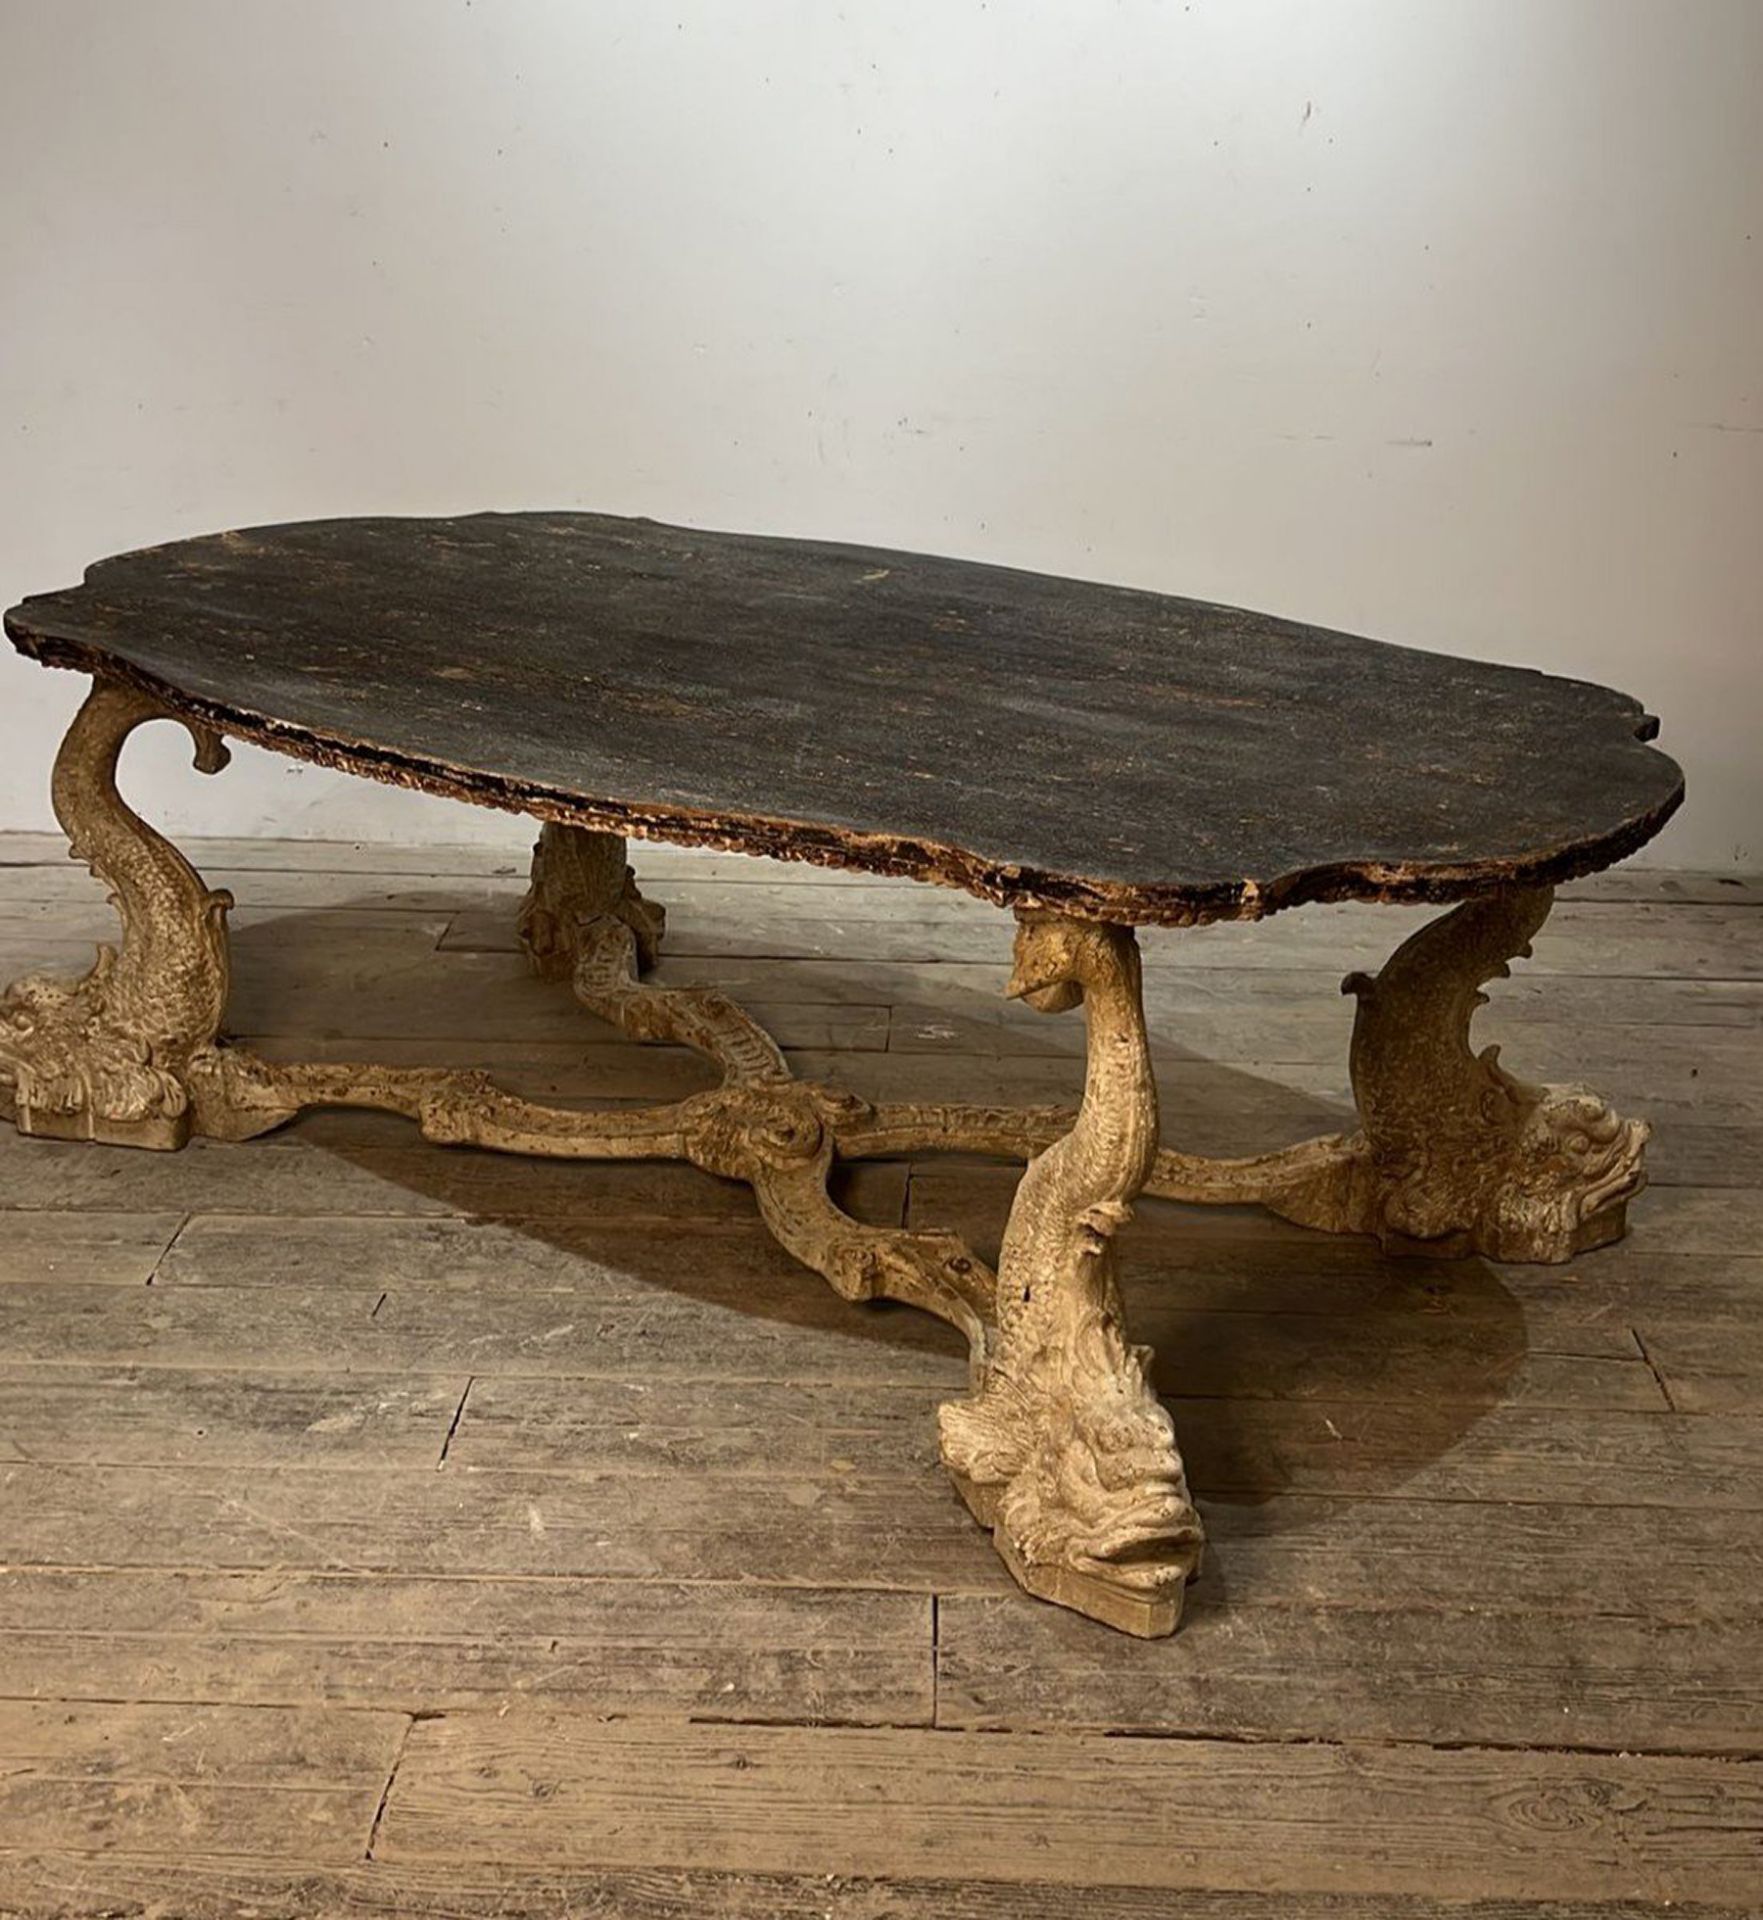 Large Italian Table from the 50s with dolphin legs, Venetian work of the 20th century - Image 4 of 5